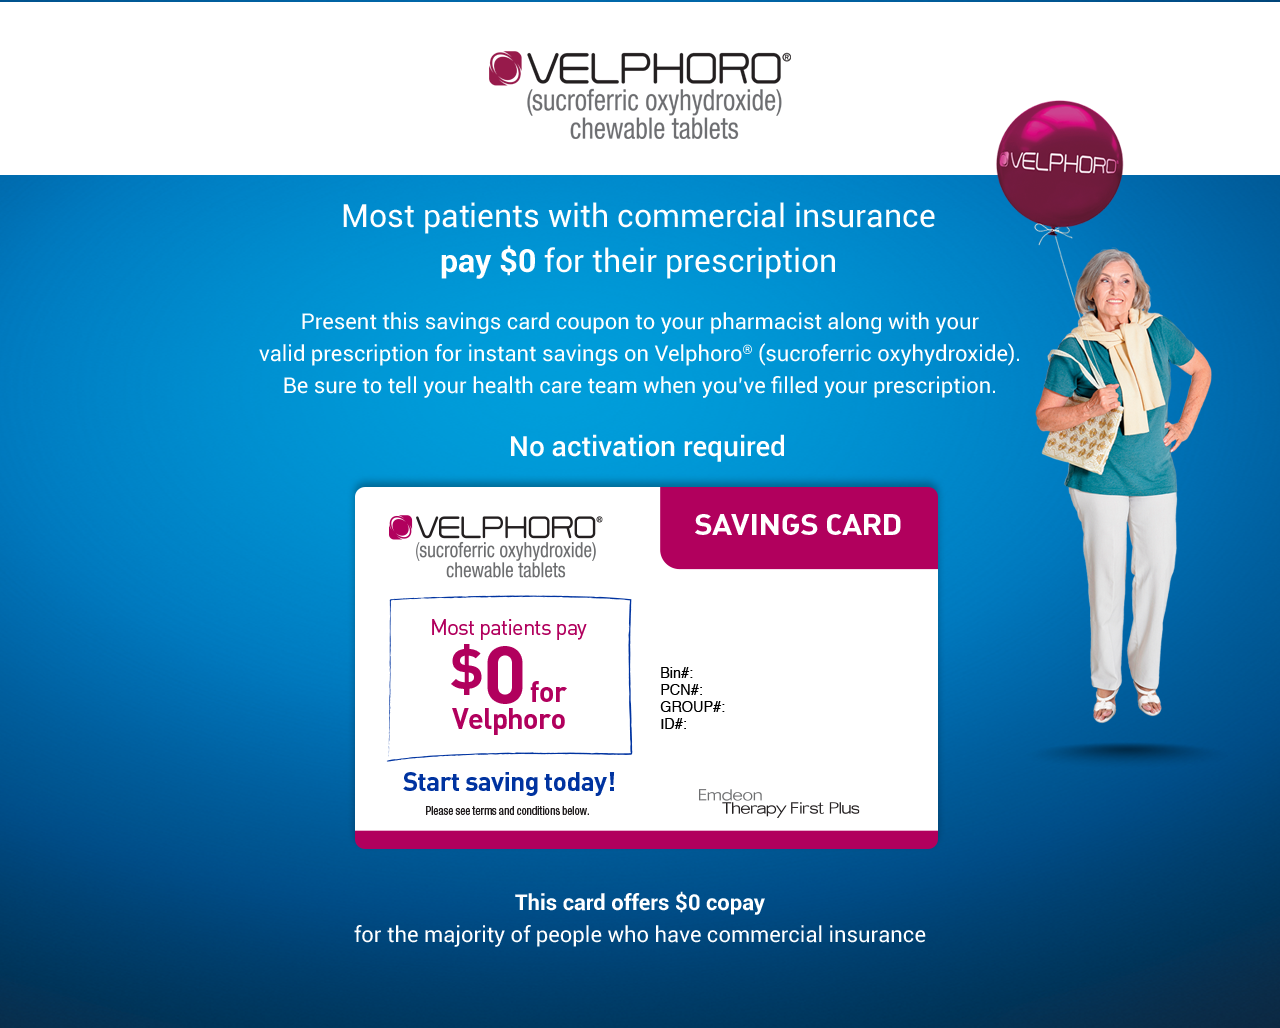 Velphoro HCP Coupon: VELPHORO® (sucroferric oxyhydroxide) chewable tablets VELPHORO Most patients pay $0 for their prescription Present this savings card coupon to your pharmacist along with your valid prescription for instant savings on Velphoro® (sucroferric oxyhydroxide). Be sure to tell your health care team when you've filled your prescription. No activation required